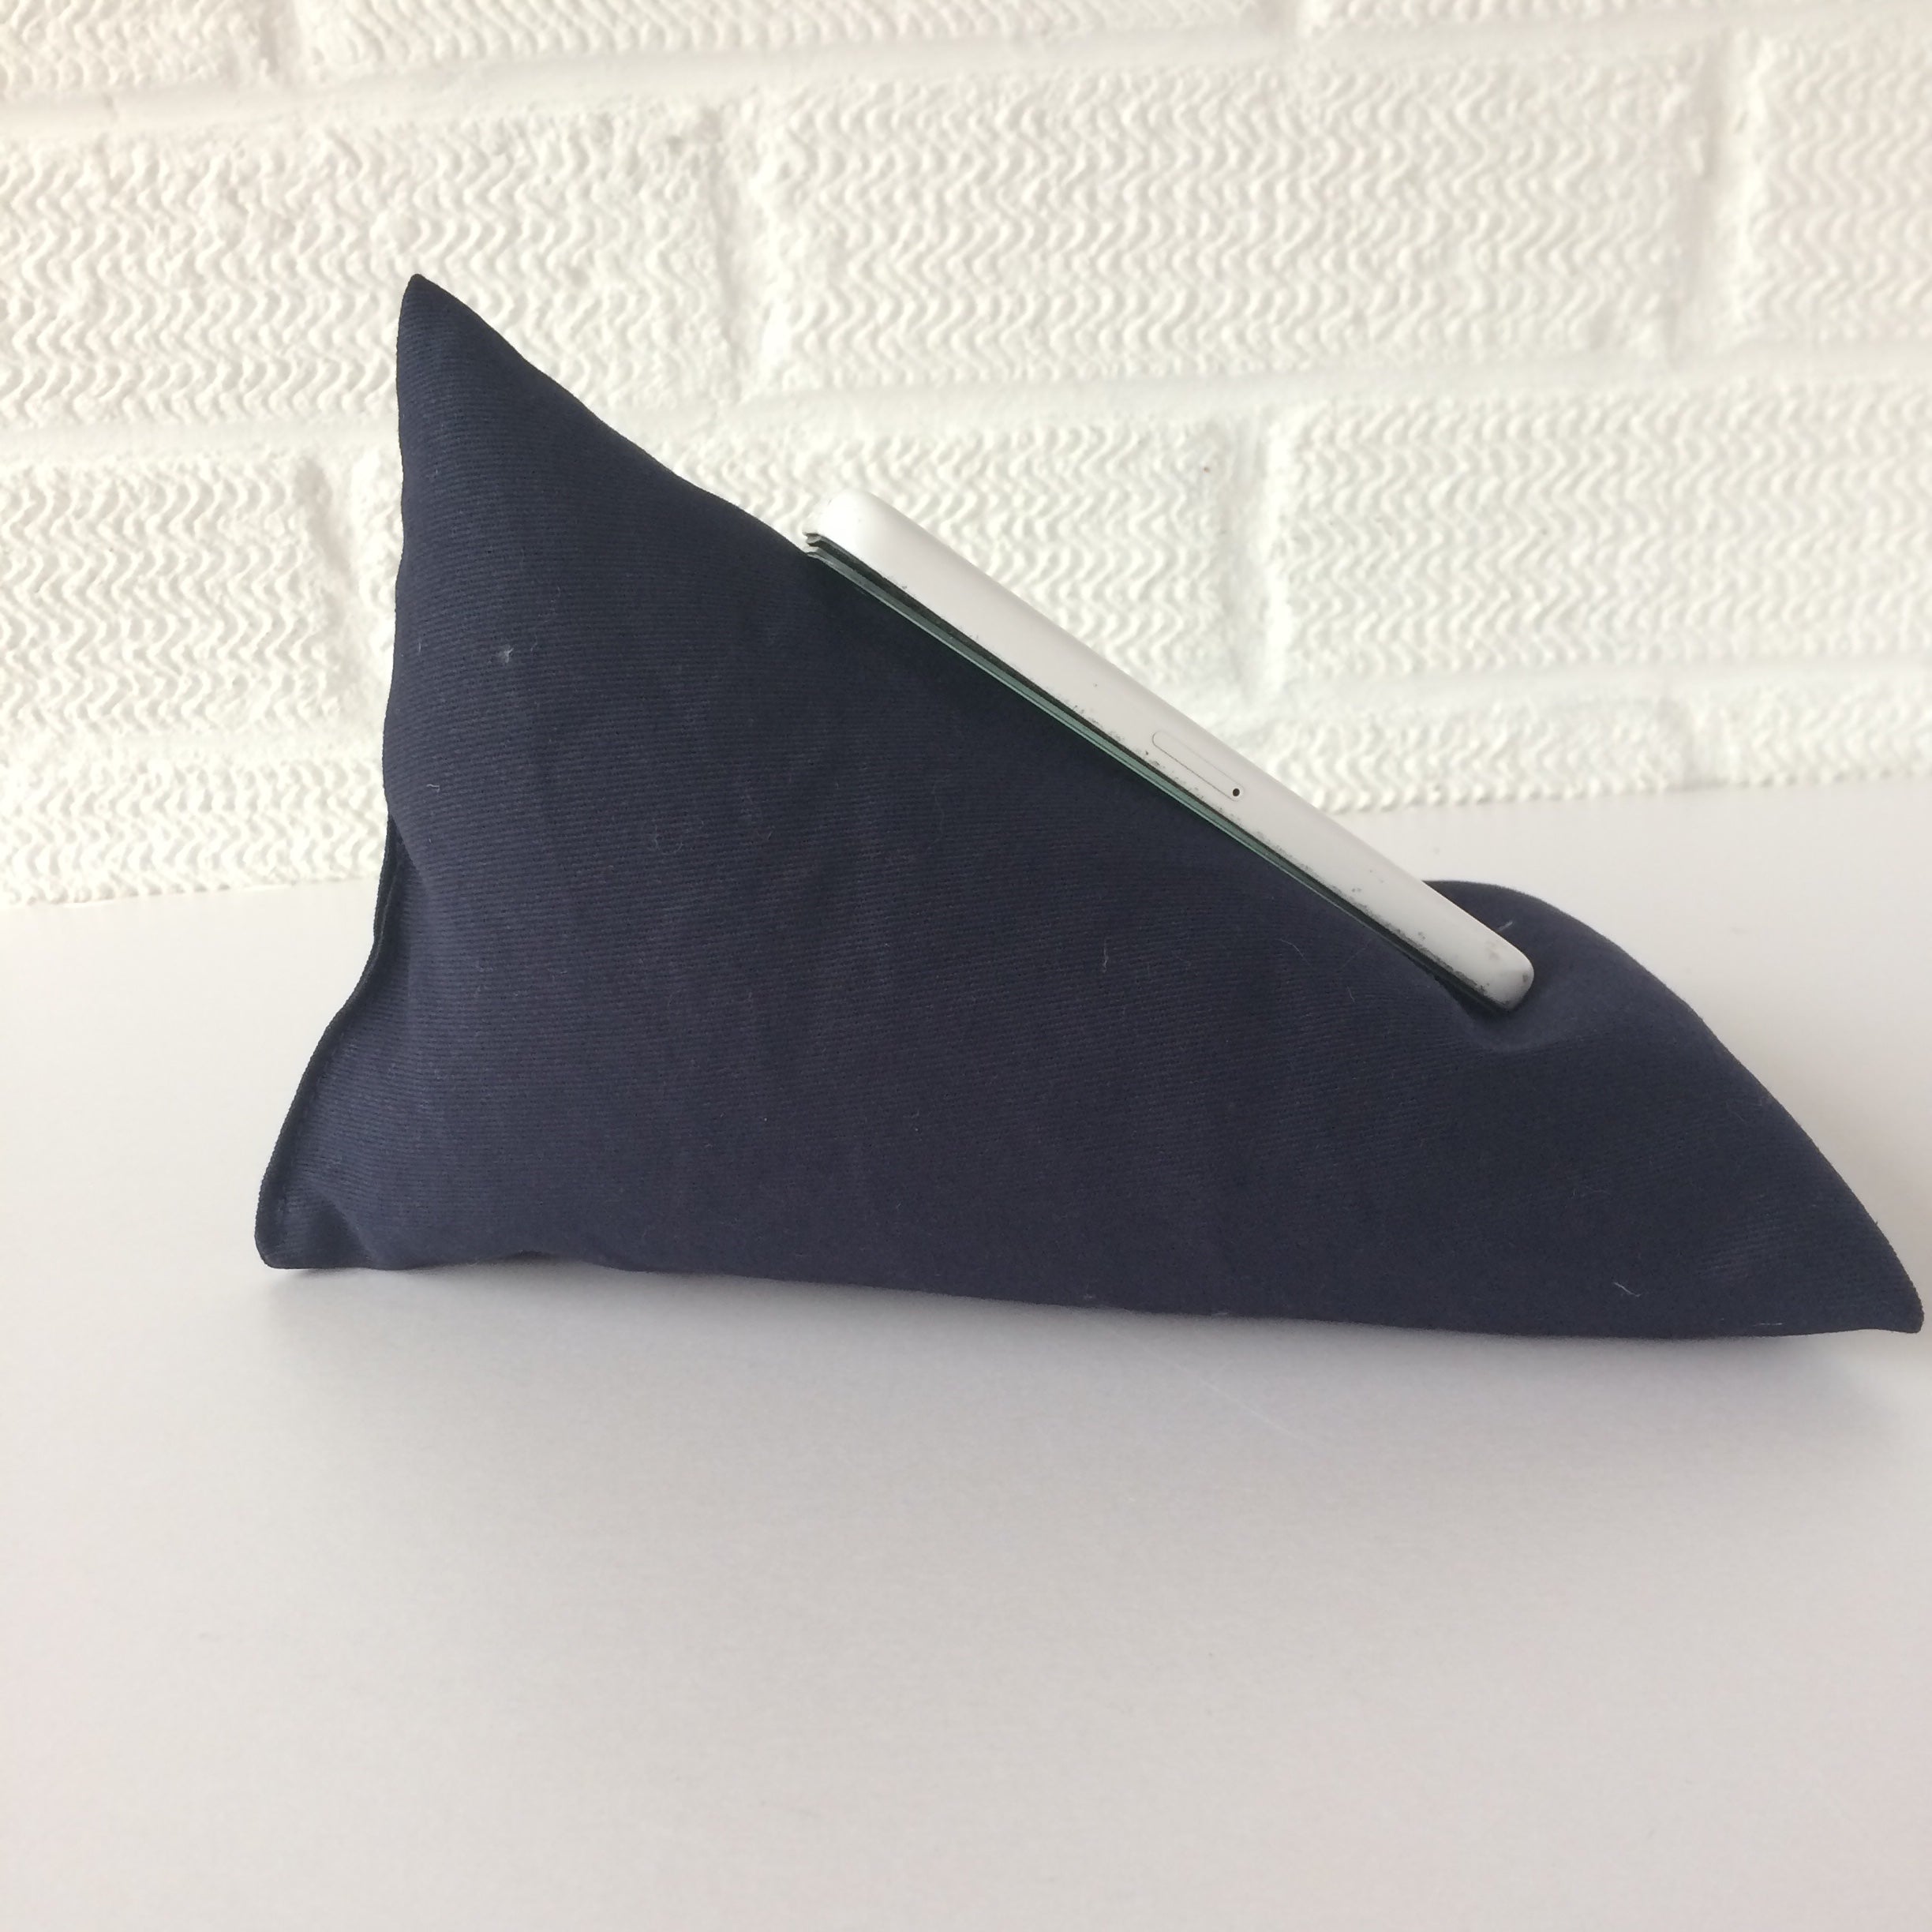 iphone or smart phone bean bag holder with a navy drill canvas fabric